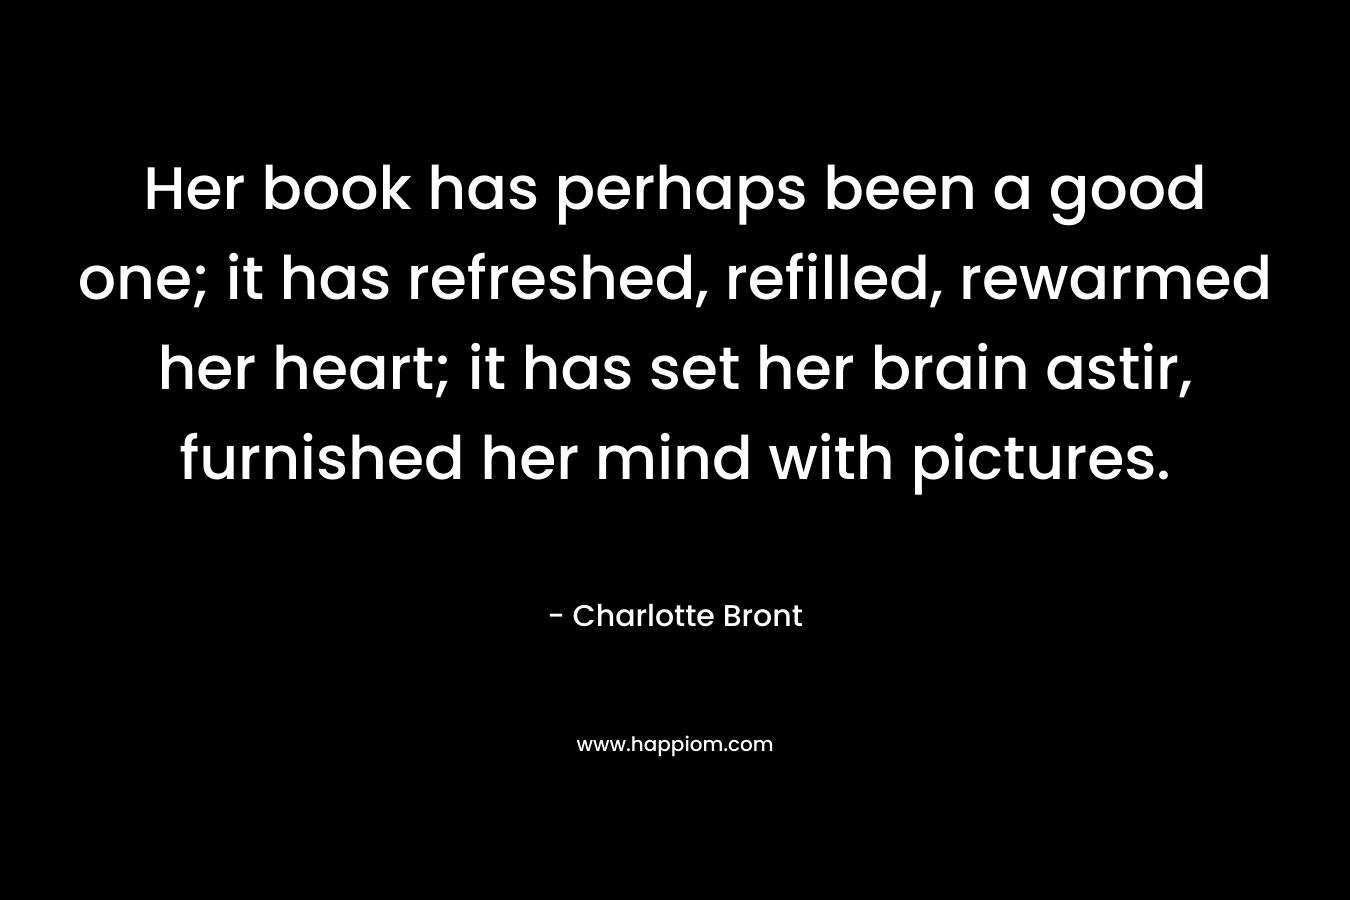 Her book has perhaps been a good one; it has refreshed, refilled, rewarmed her heart; it has set her brain astir, furnished her mind with pictures.